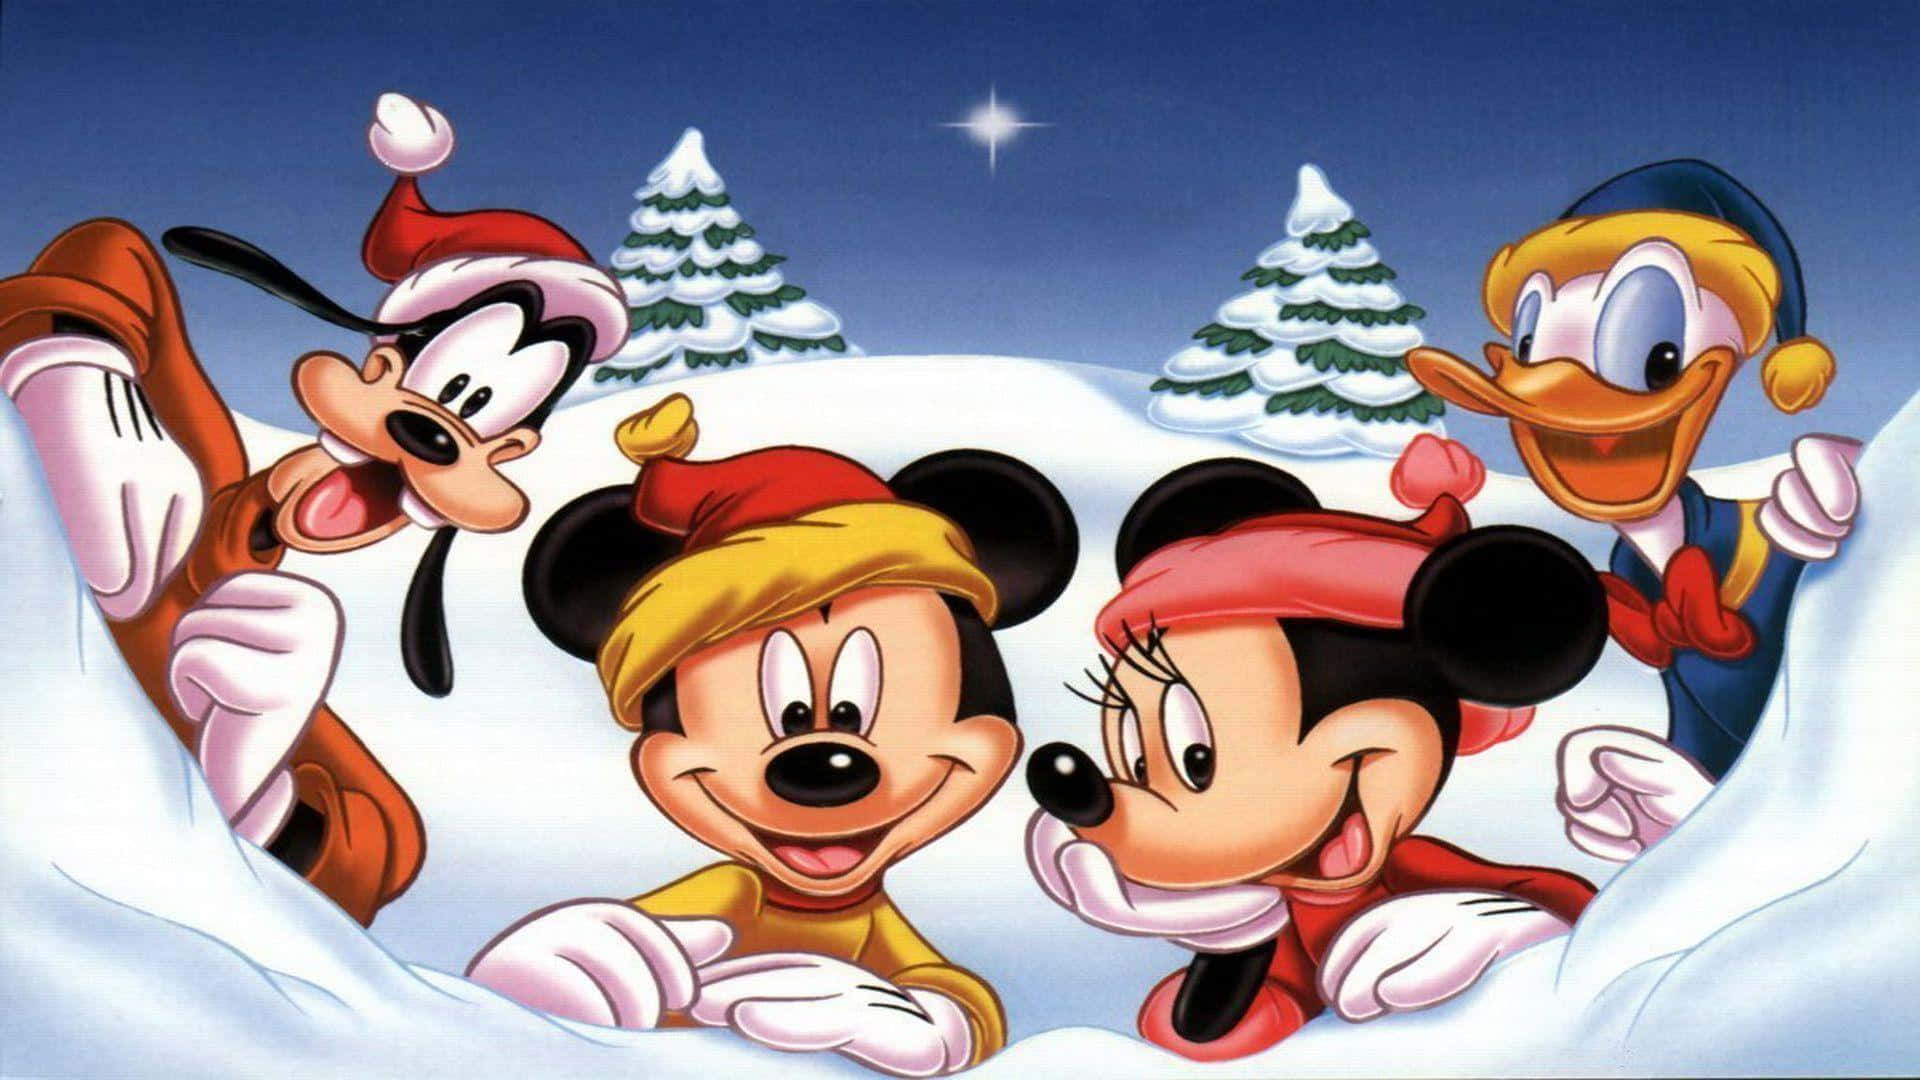 A Magical Christmas with Disney